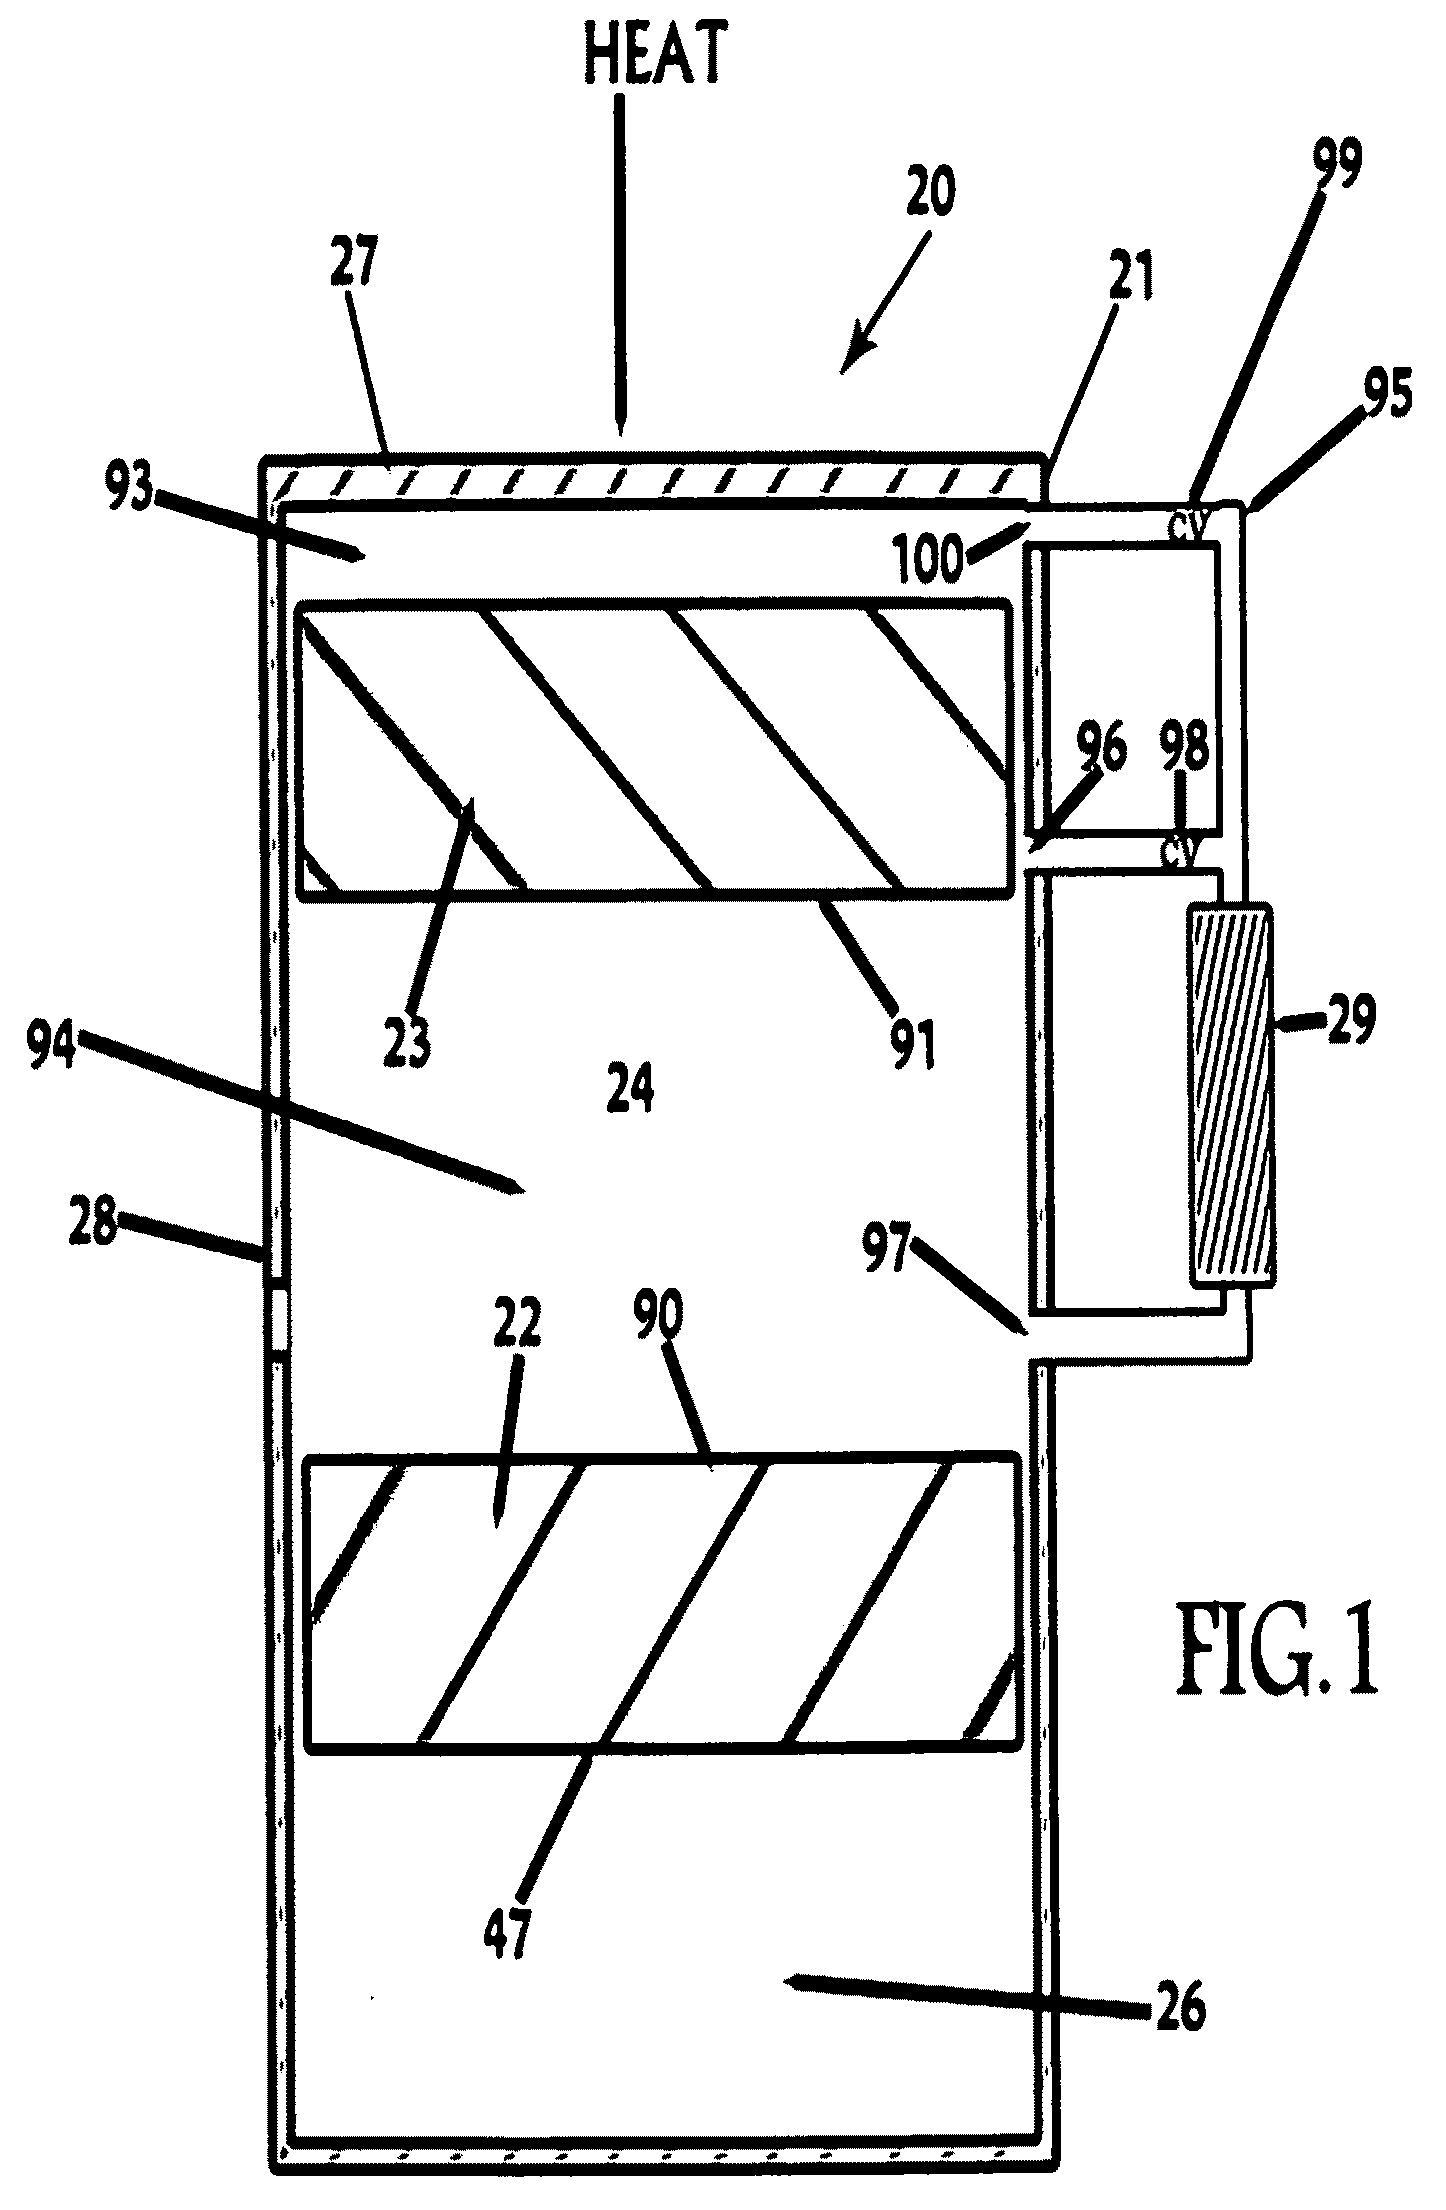 Method for increasing performance of a stirling or free-piston engine